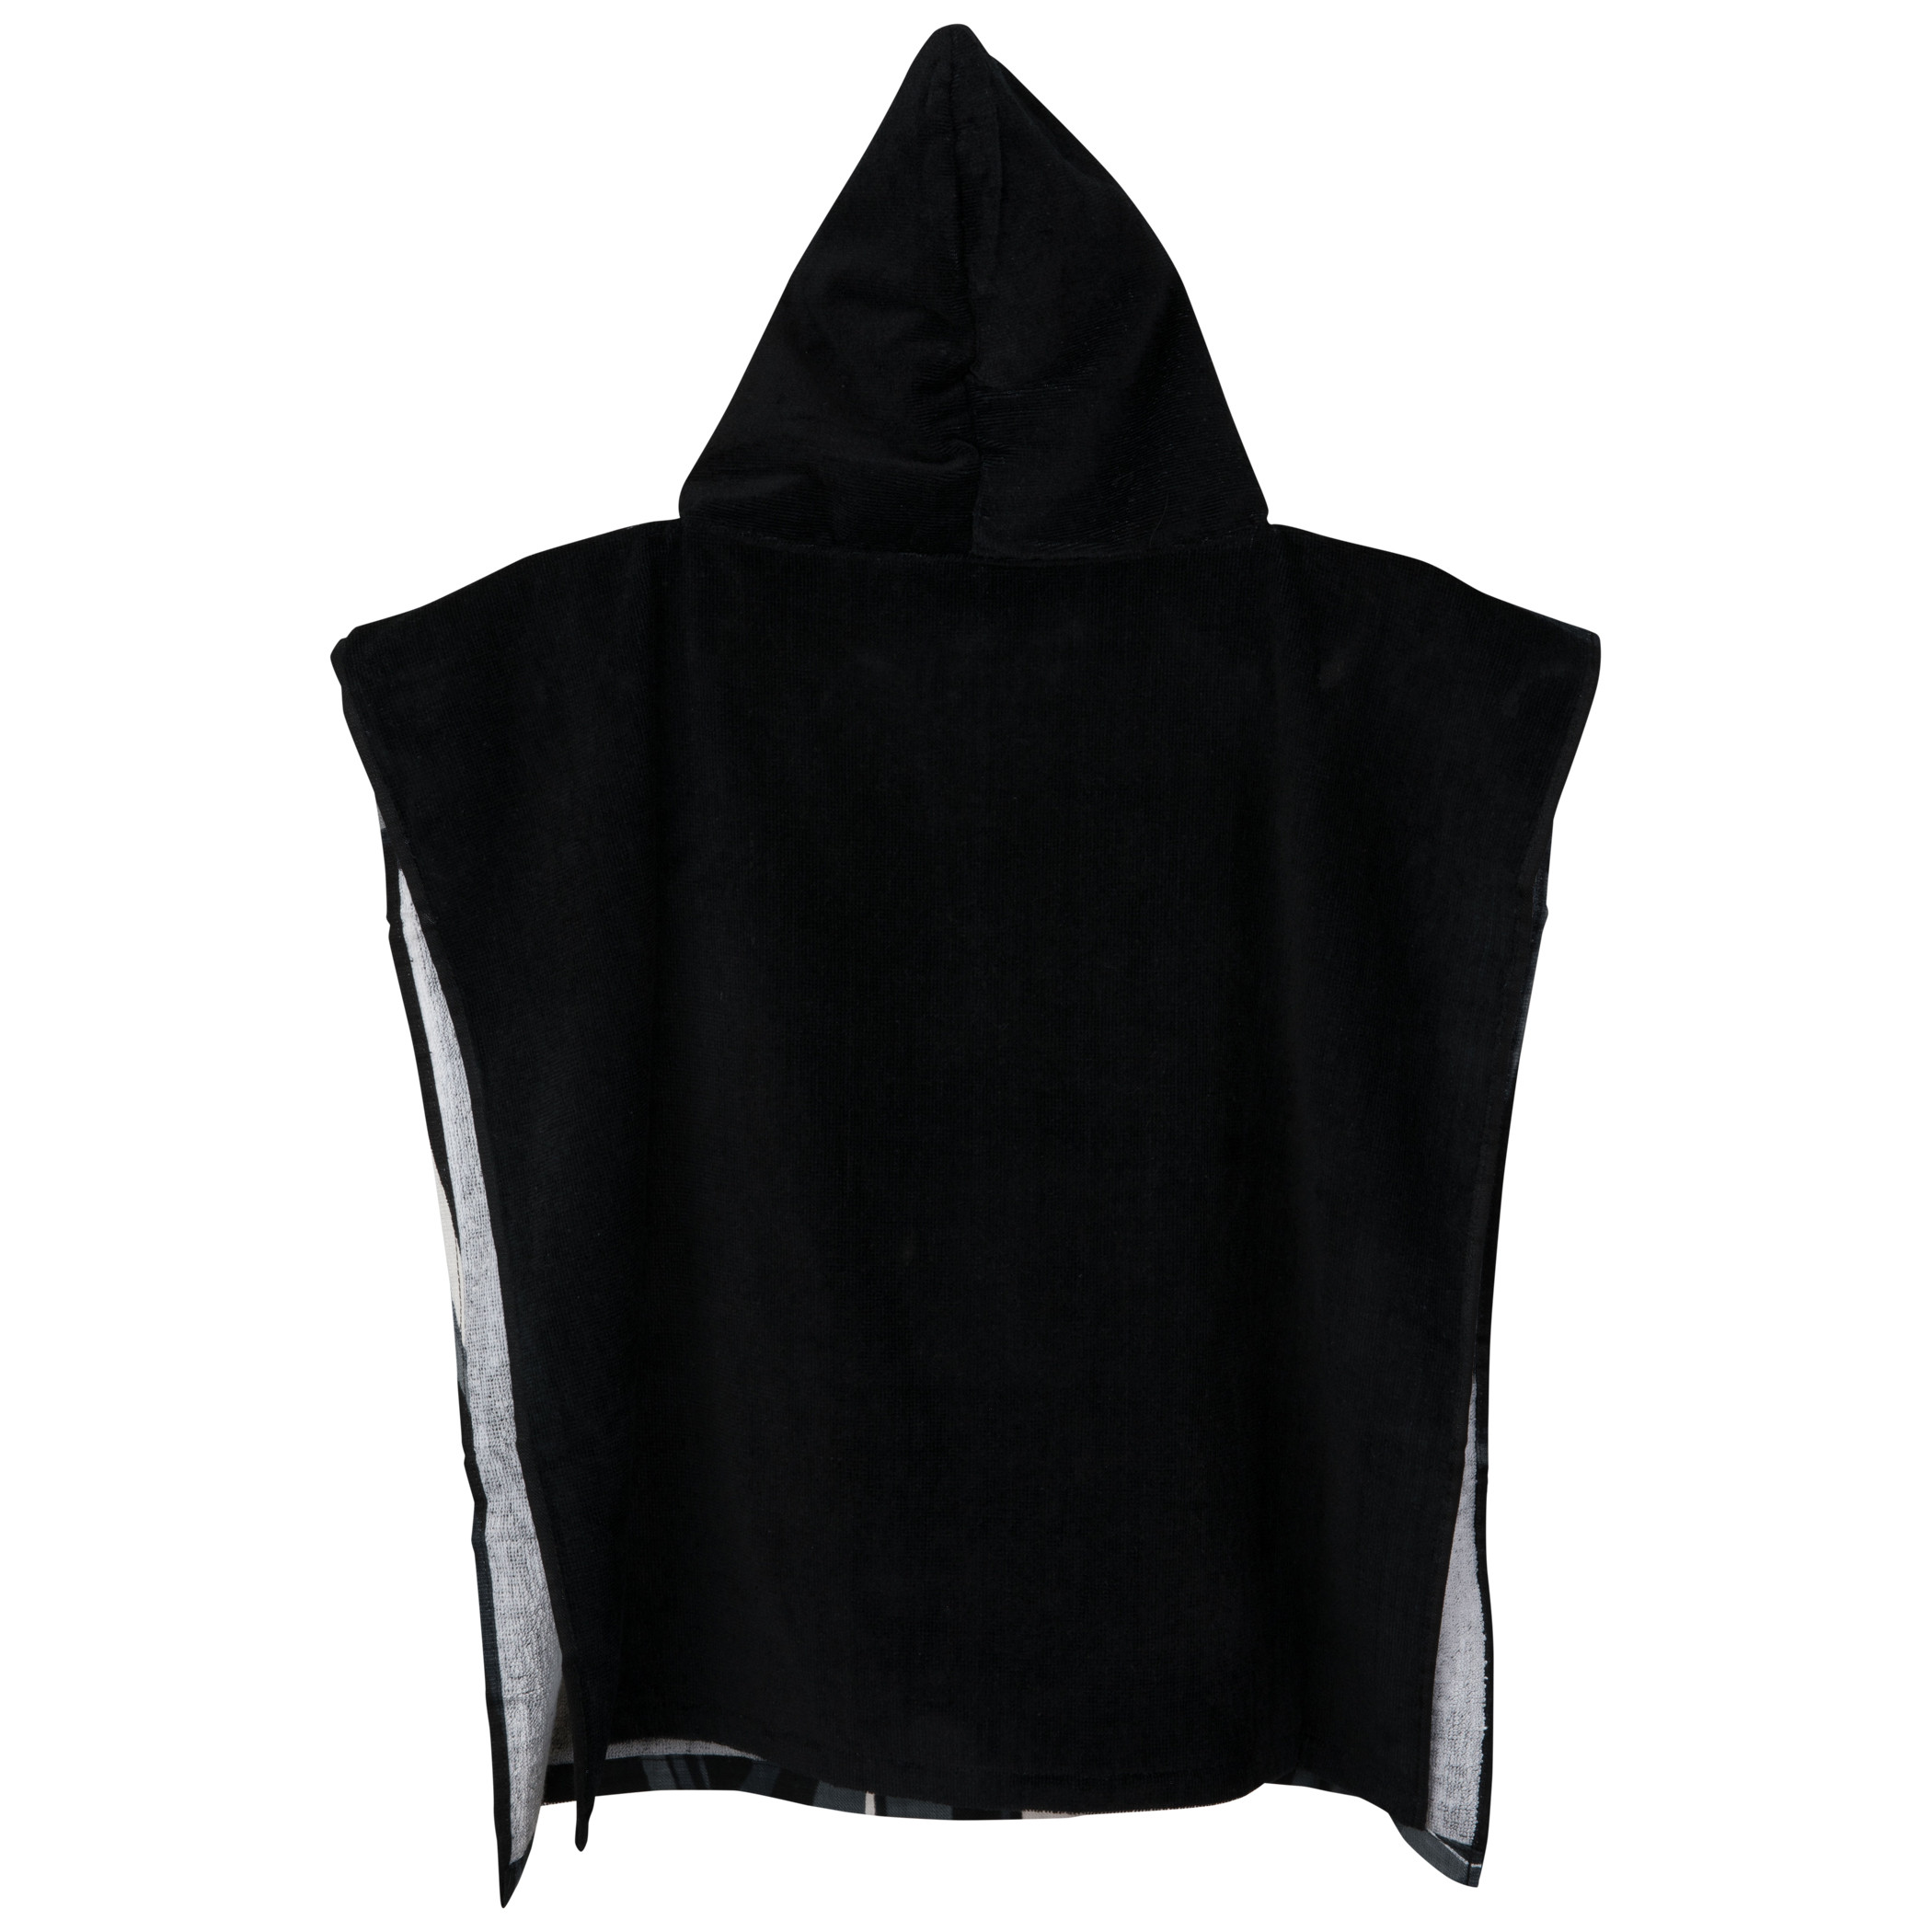 Star Wars Darth Vader Hooded Youth Costume Towel